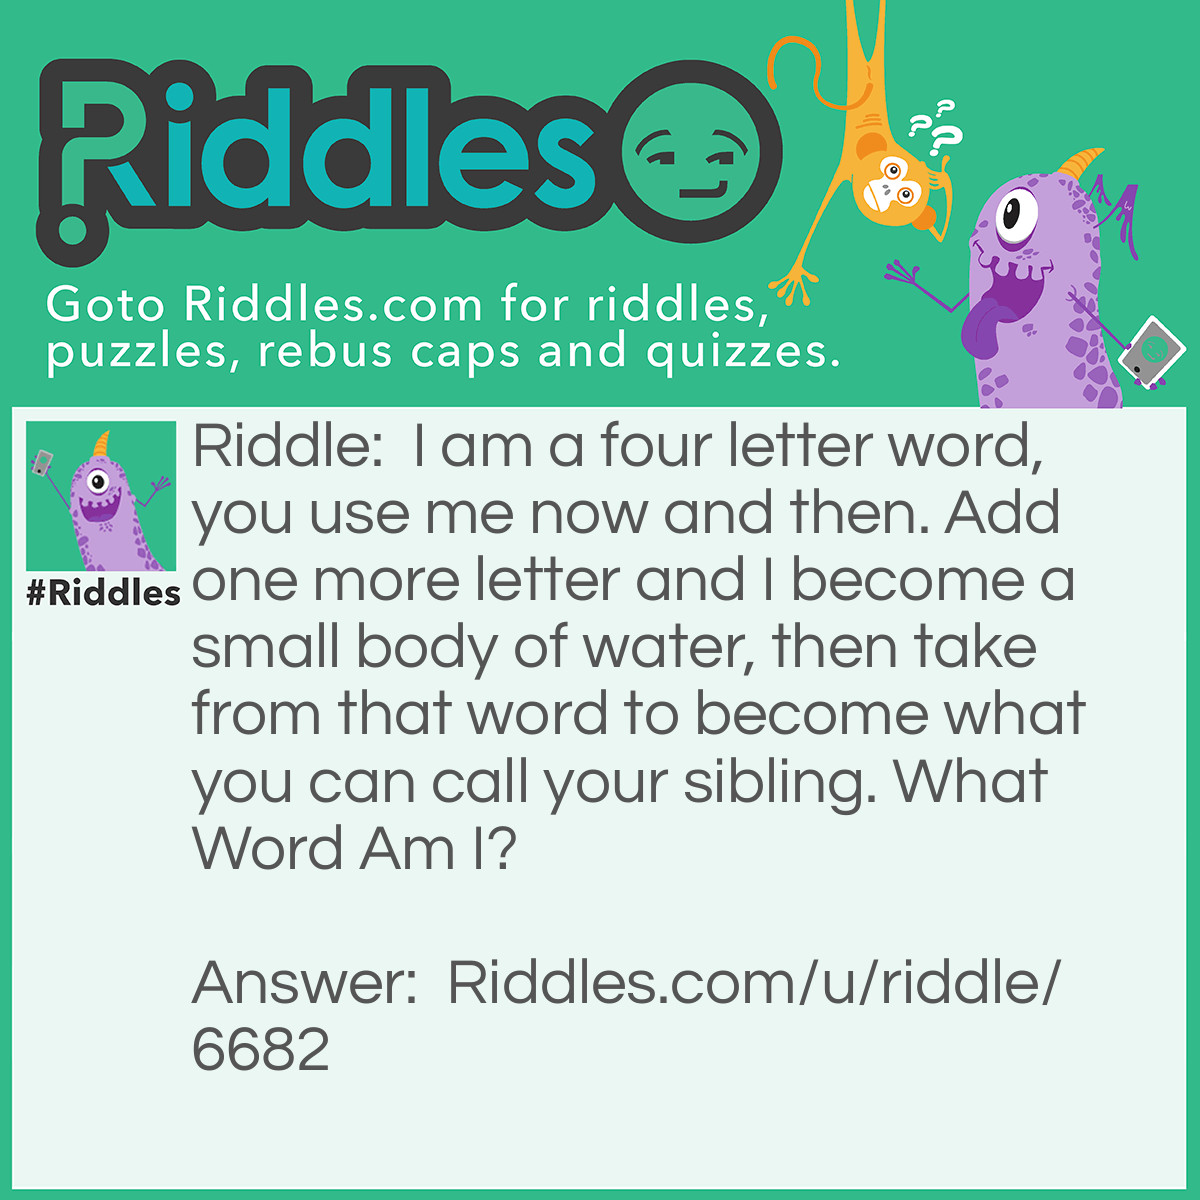 Riddle: I am a four letter word, you use me now and then. Add one more letter and I become a small body of water, then take from that word to become what you can call your sibling. What Word Am I? Answer: Book, Brook, Bro